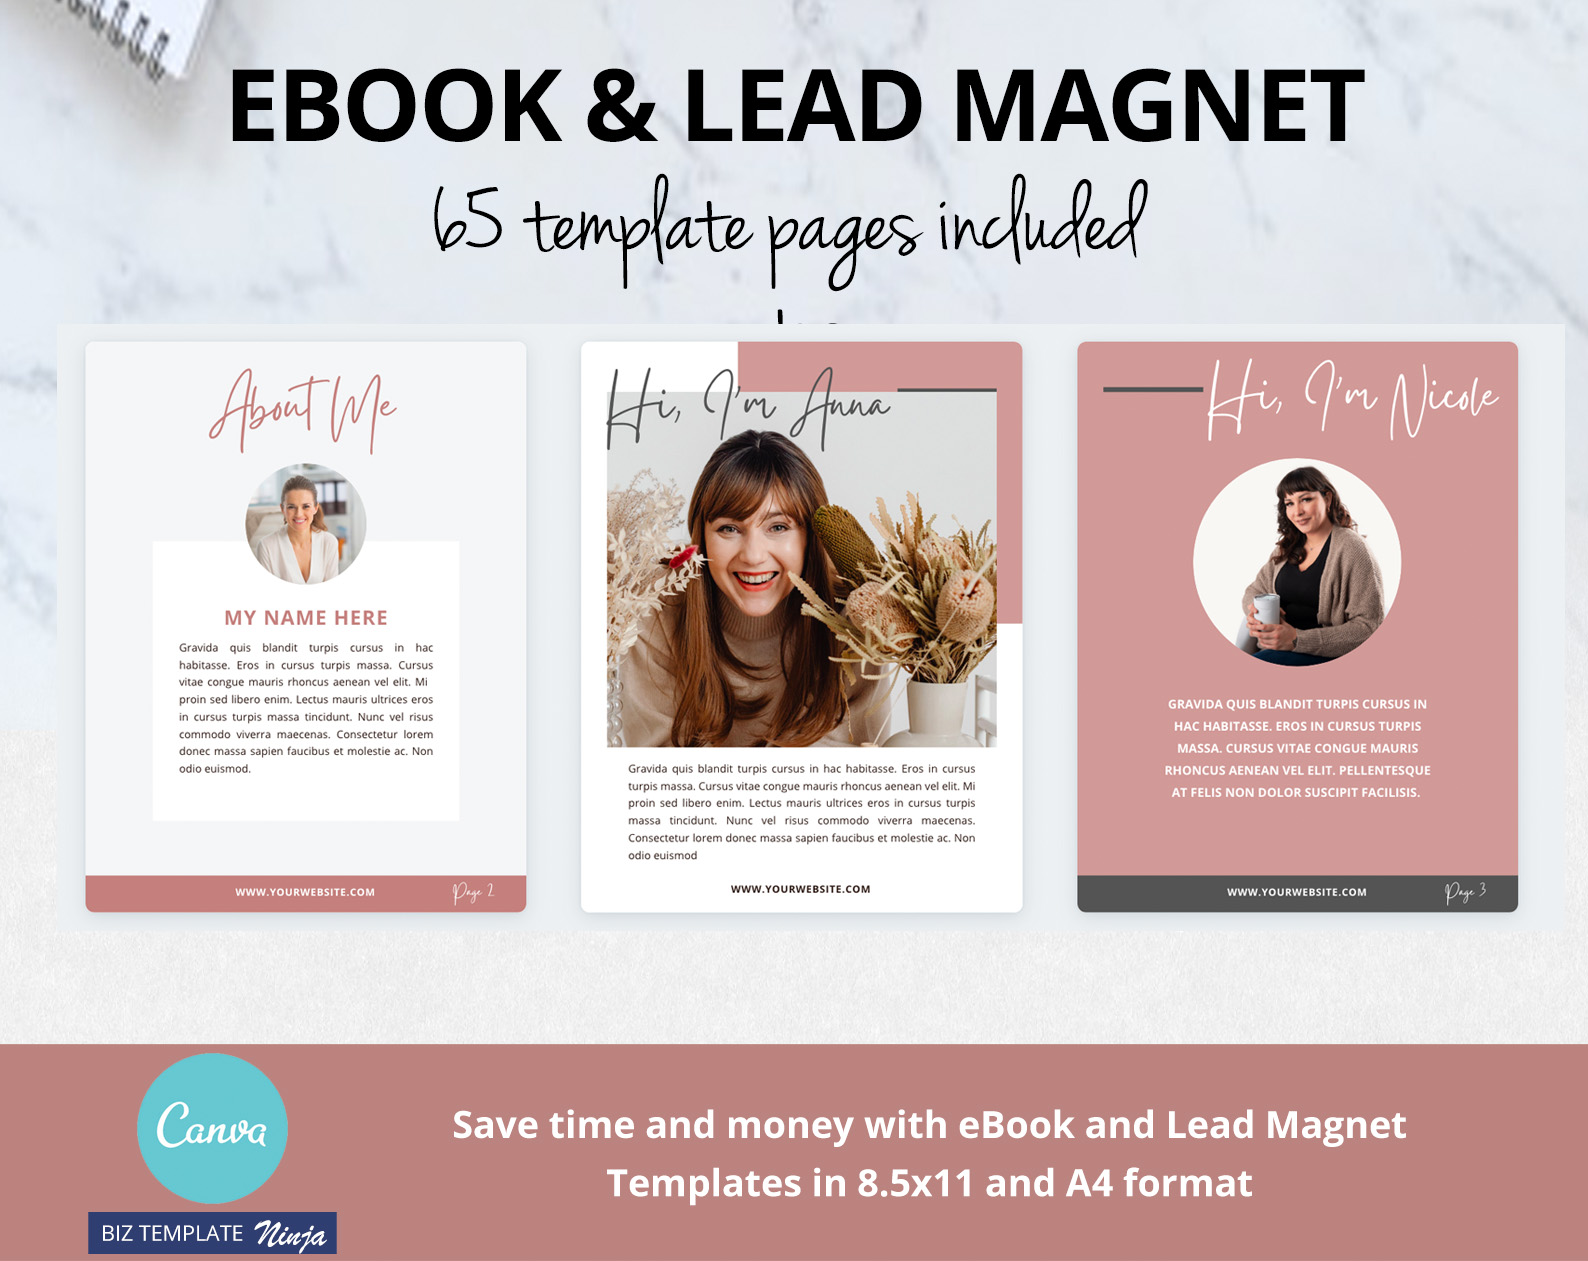 Ebook and lead magnet canva templates